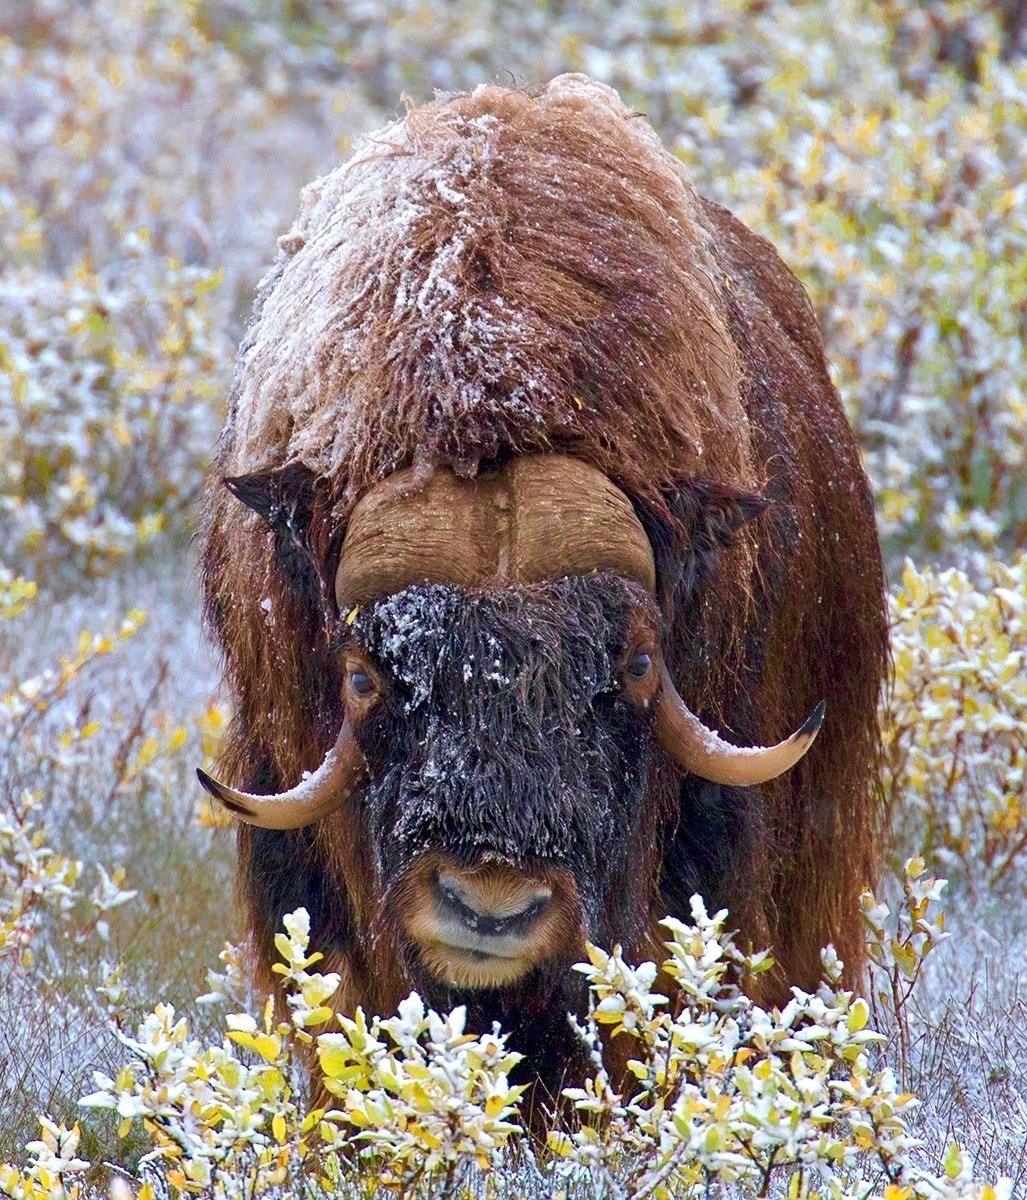 As he trekked across the tundra, Clayton met another inhabitant, a musk ox. Photo courtesy Pat Clayton